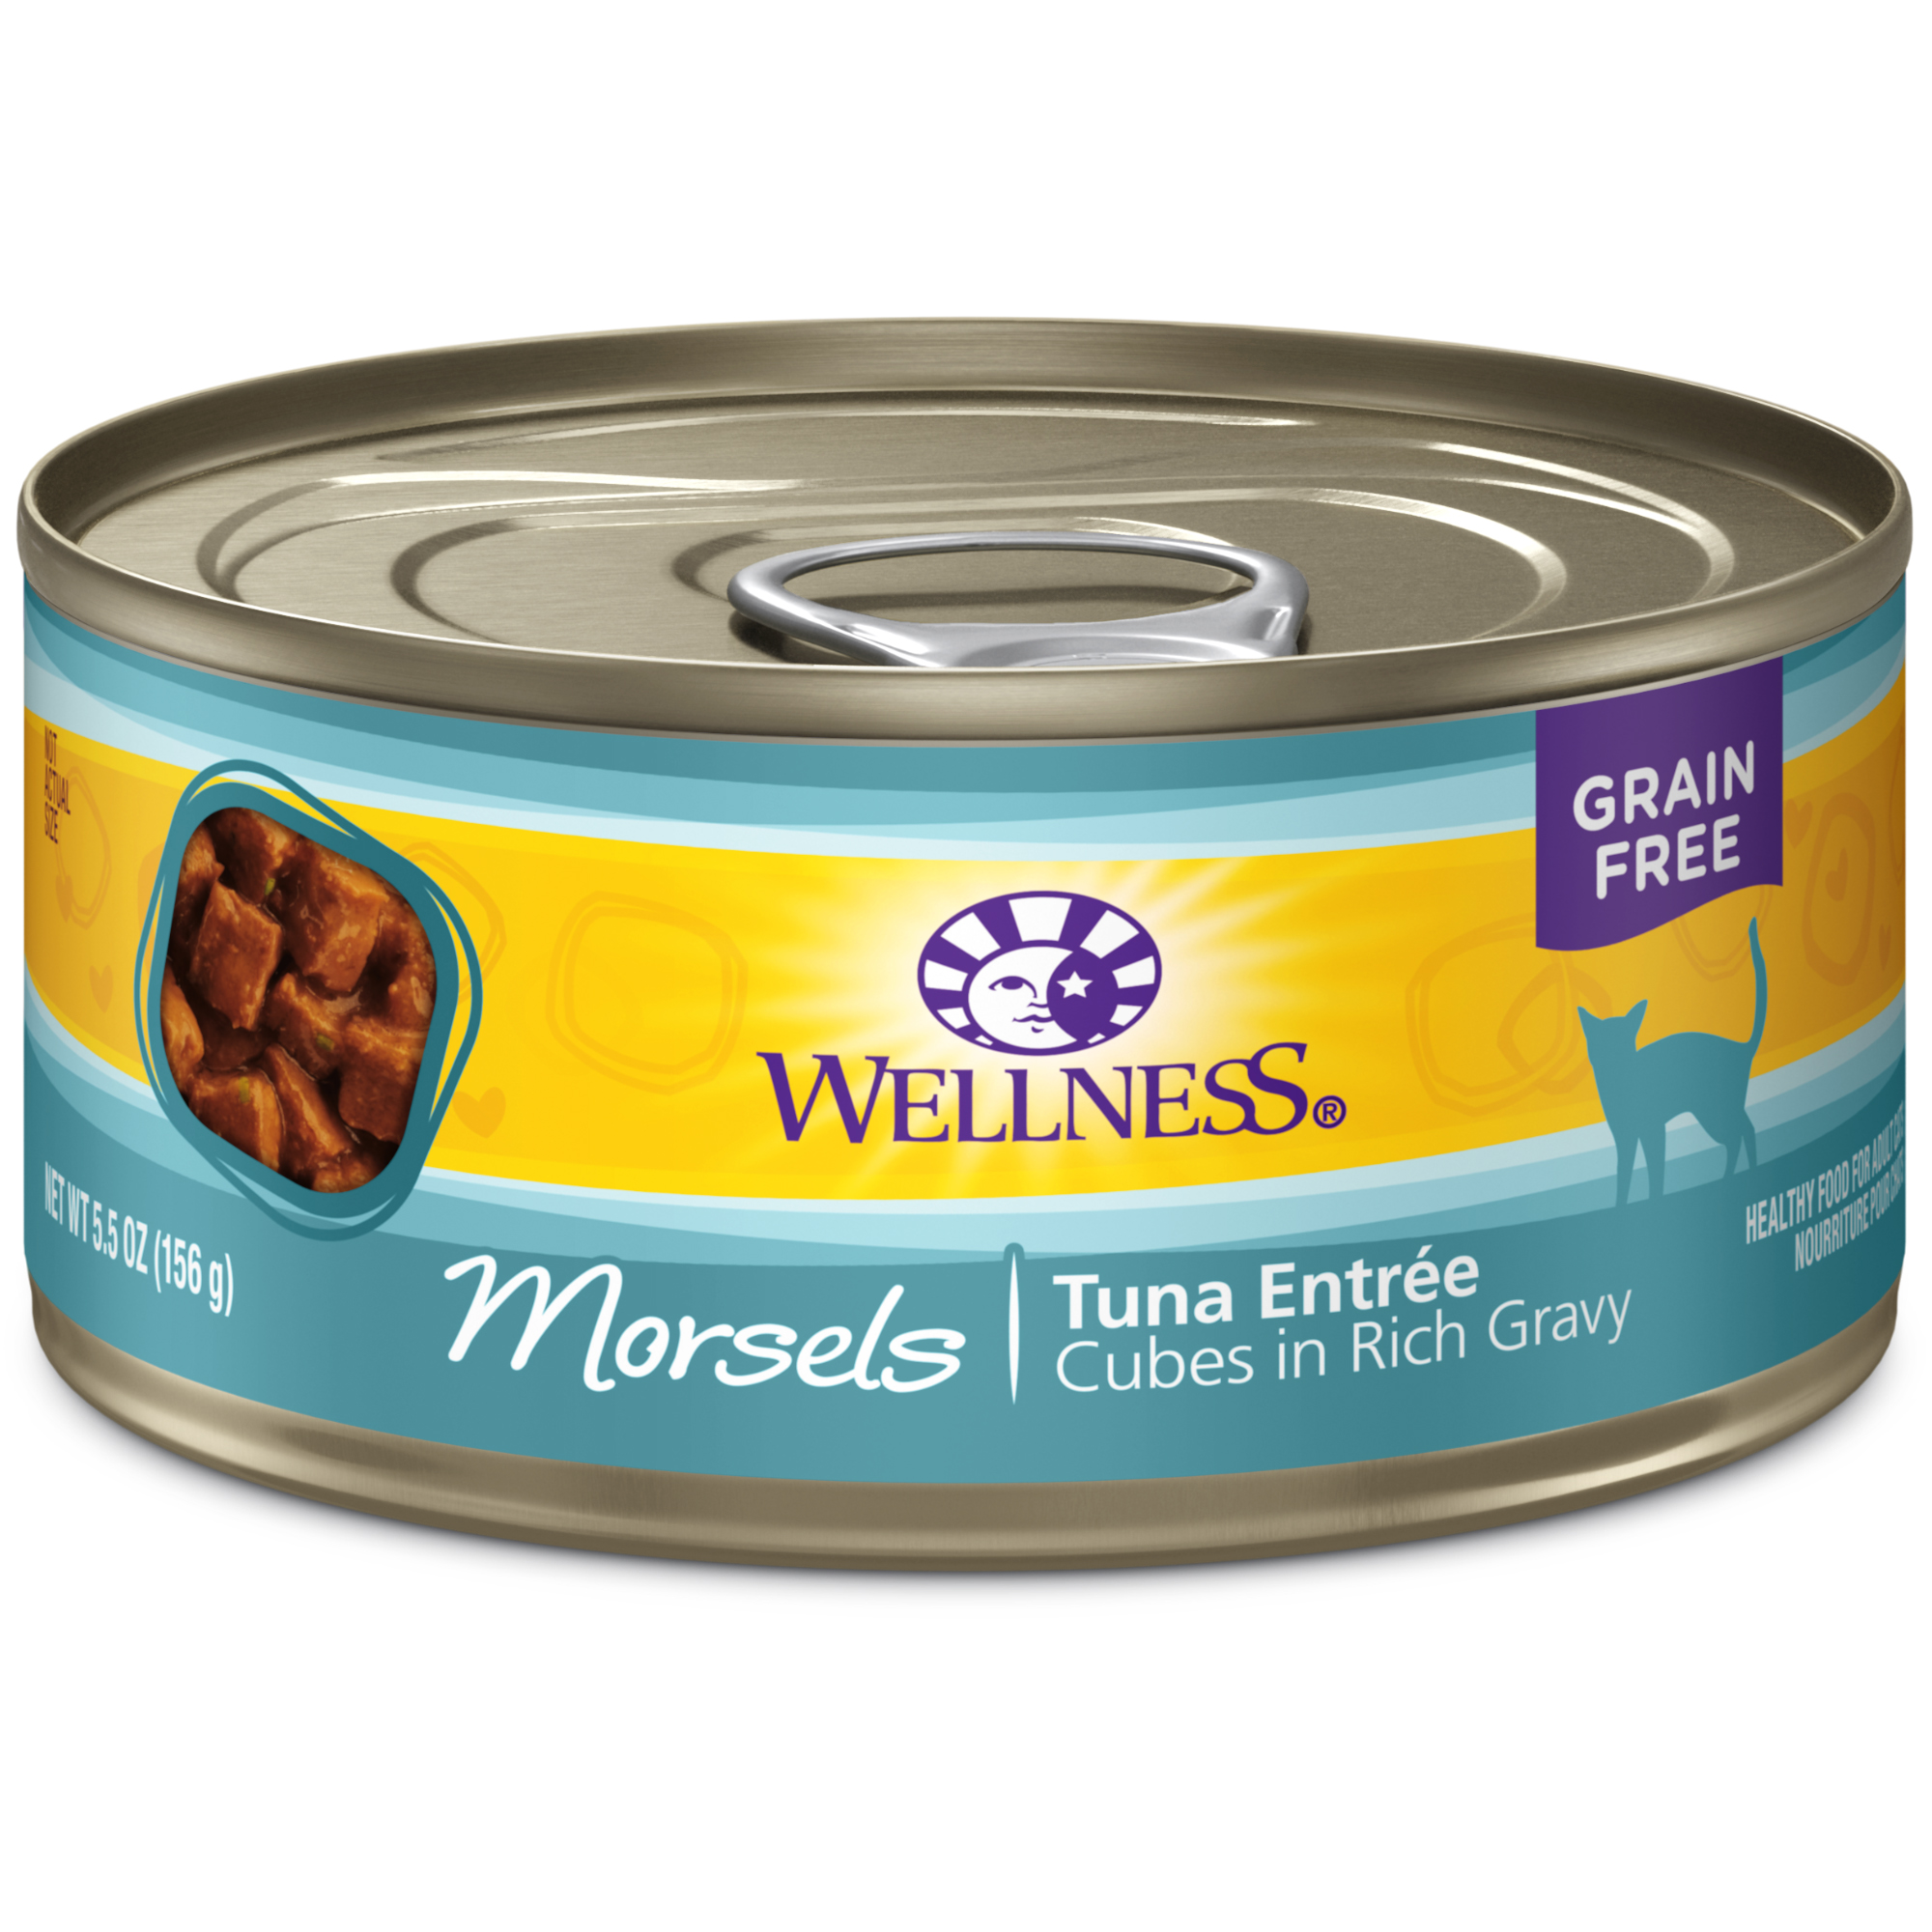 Wellness Complete Health Natural Grain Free Wet Canned Cat Food, Cubed Tuna Entree, 5.5-Ounce Can (Pack of 24) - image 1 of 8